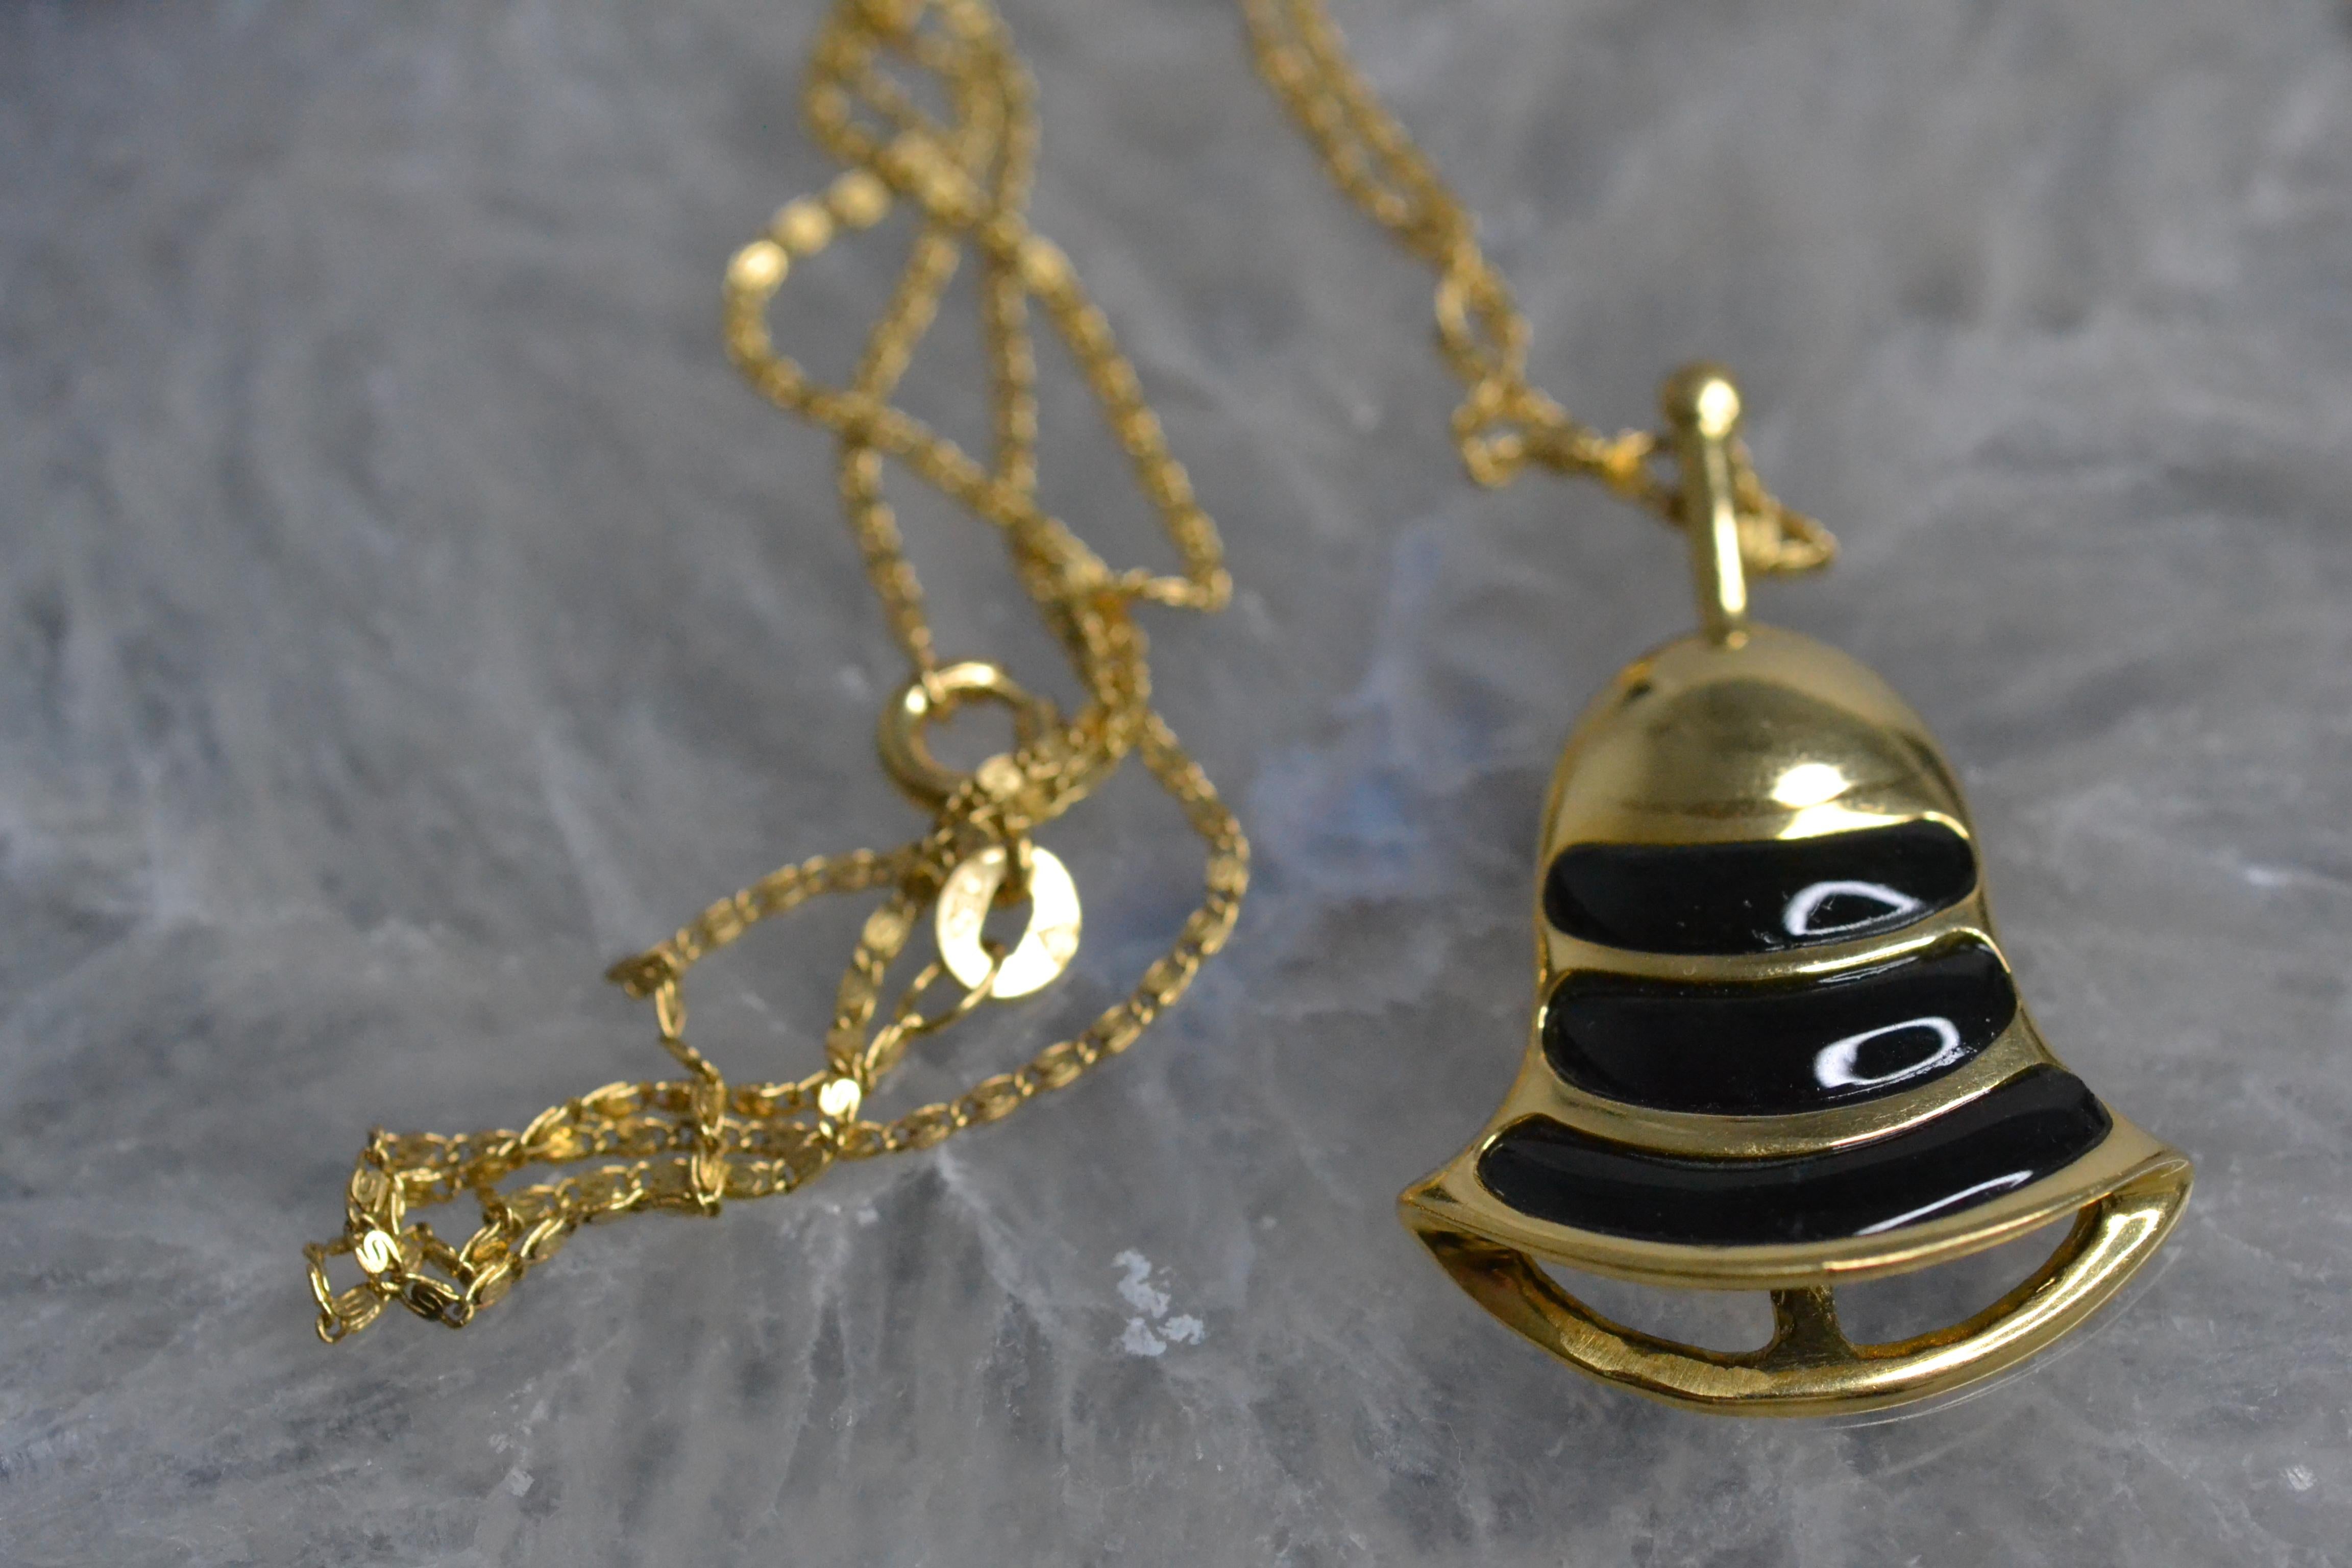 Vintage 18k Gold Bell Necklace with Onyx

These vintage bell necklaces are the perfect way to add a splash of colour to any outfit. Available in malachite, red jasper, tiger's eye and onyx, these limited edition necklaces from the 80s have a unique